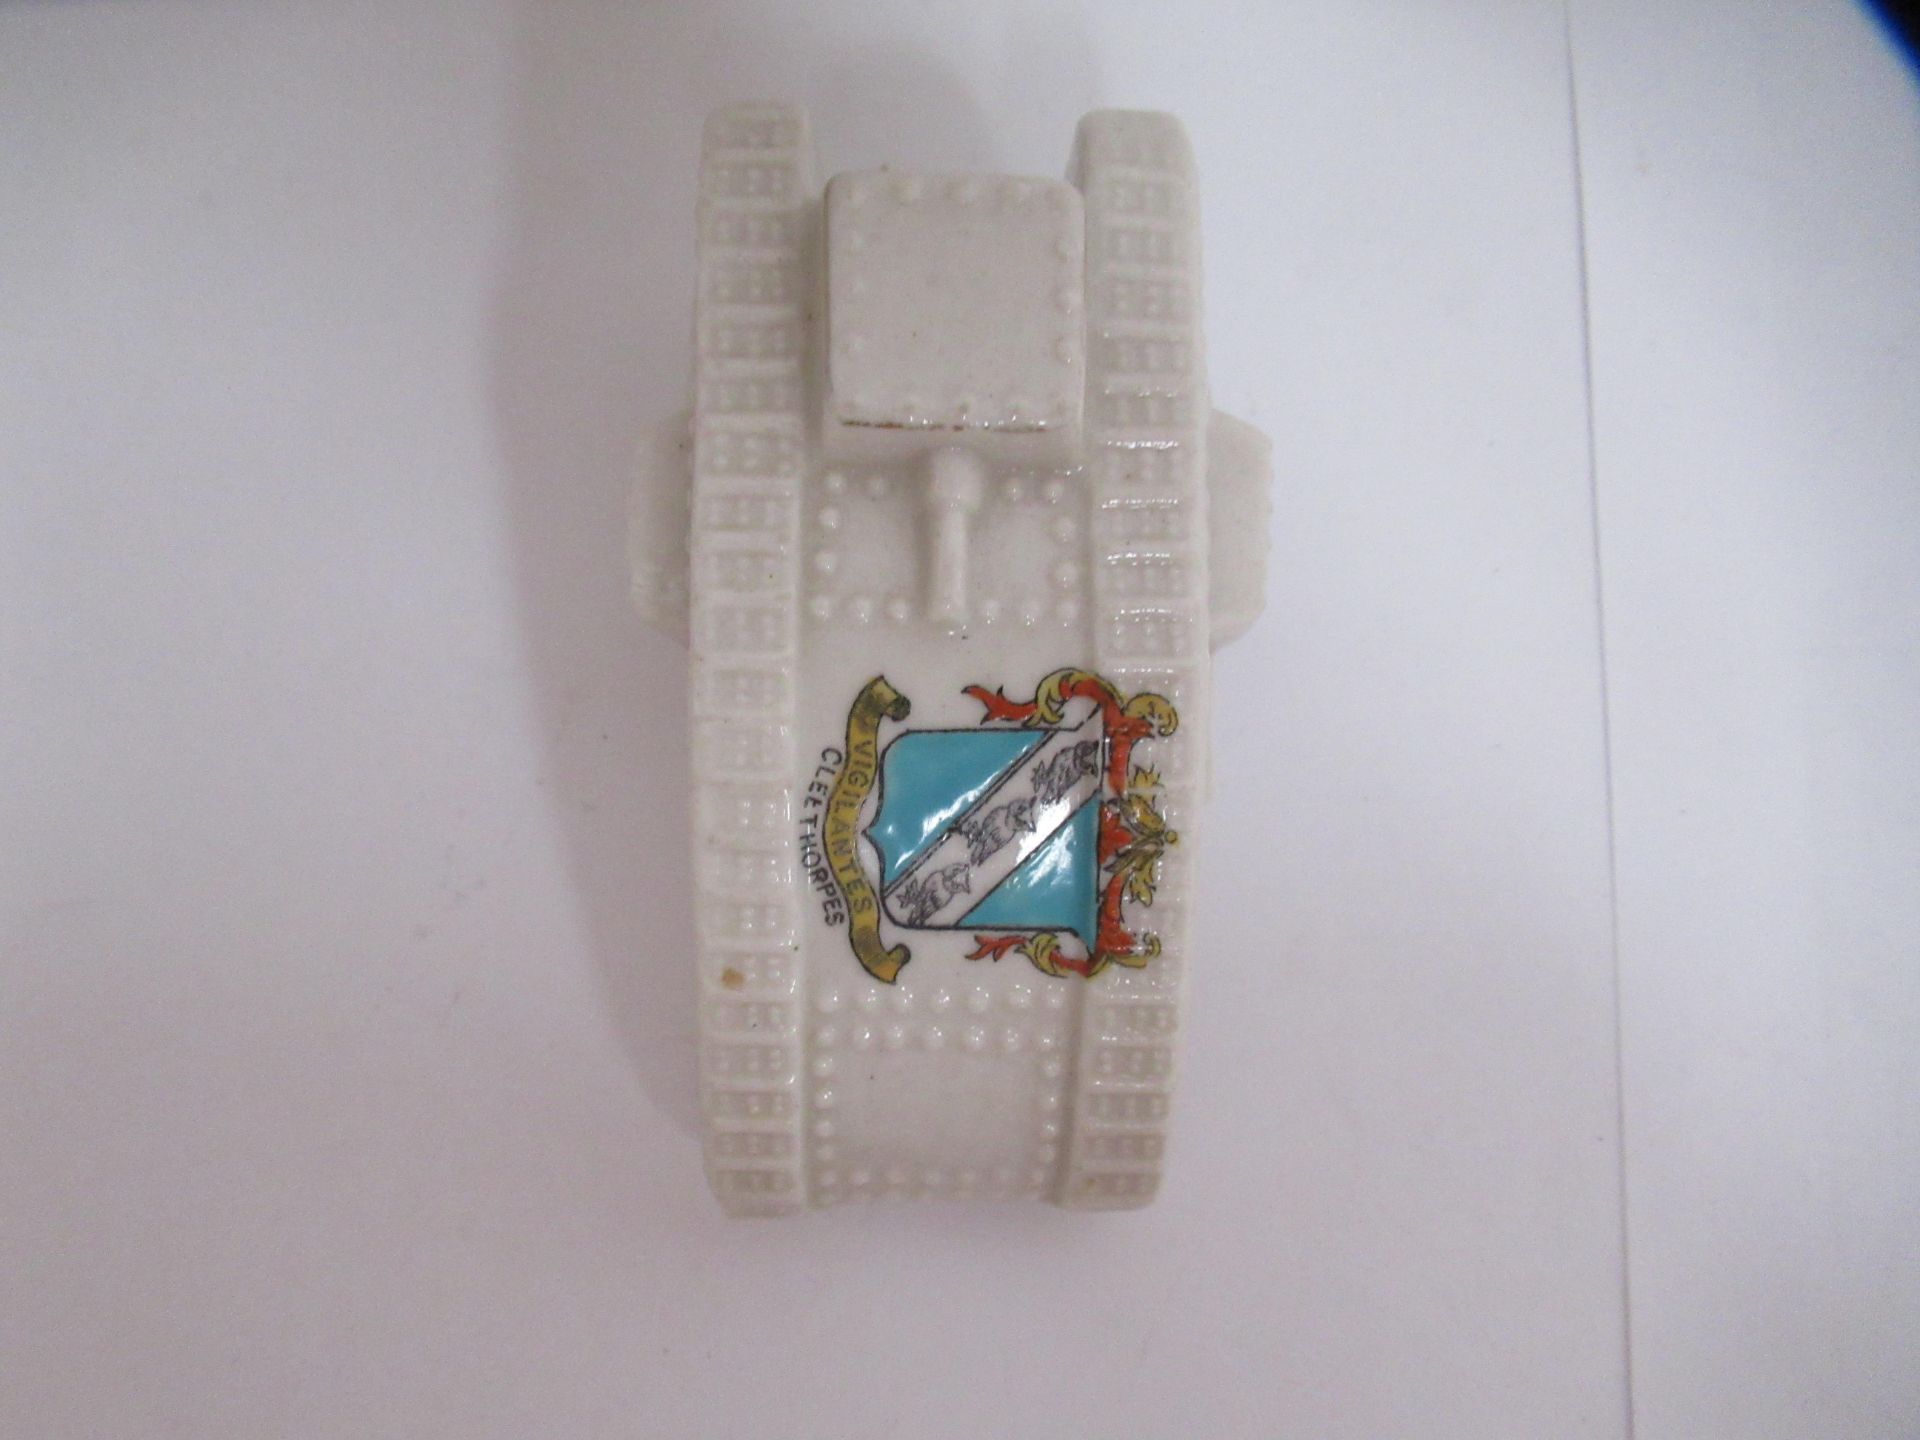 Crested China waterfall heraldic 'model of a British Tank' with Cleethorpes coat of arms - Image 6 of 9